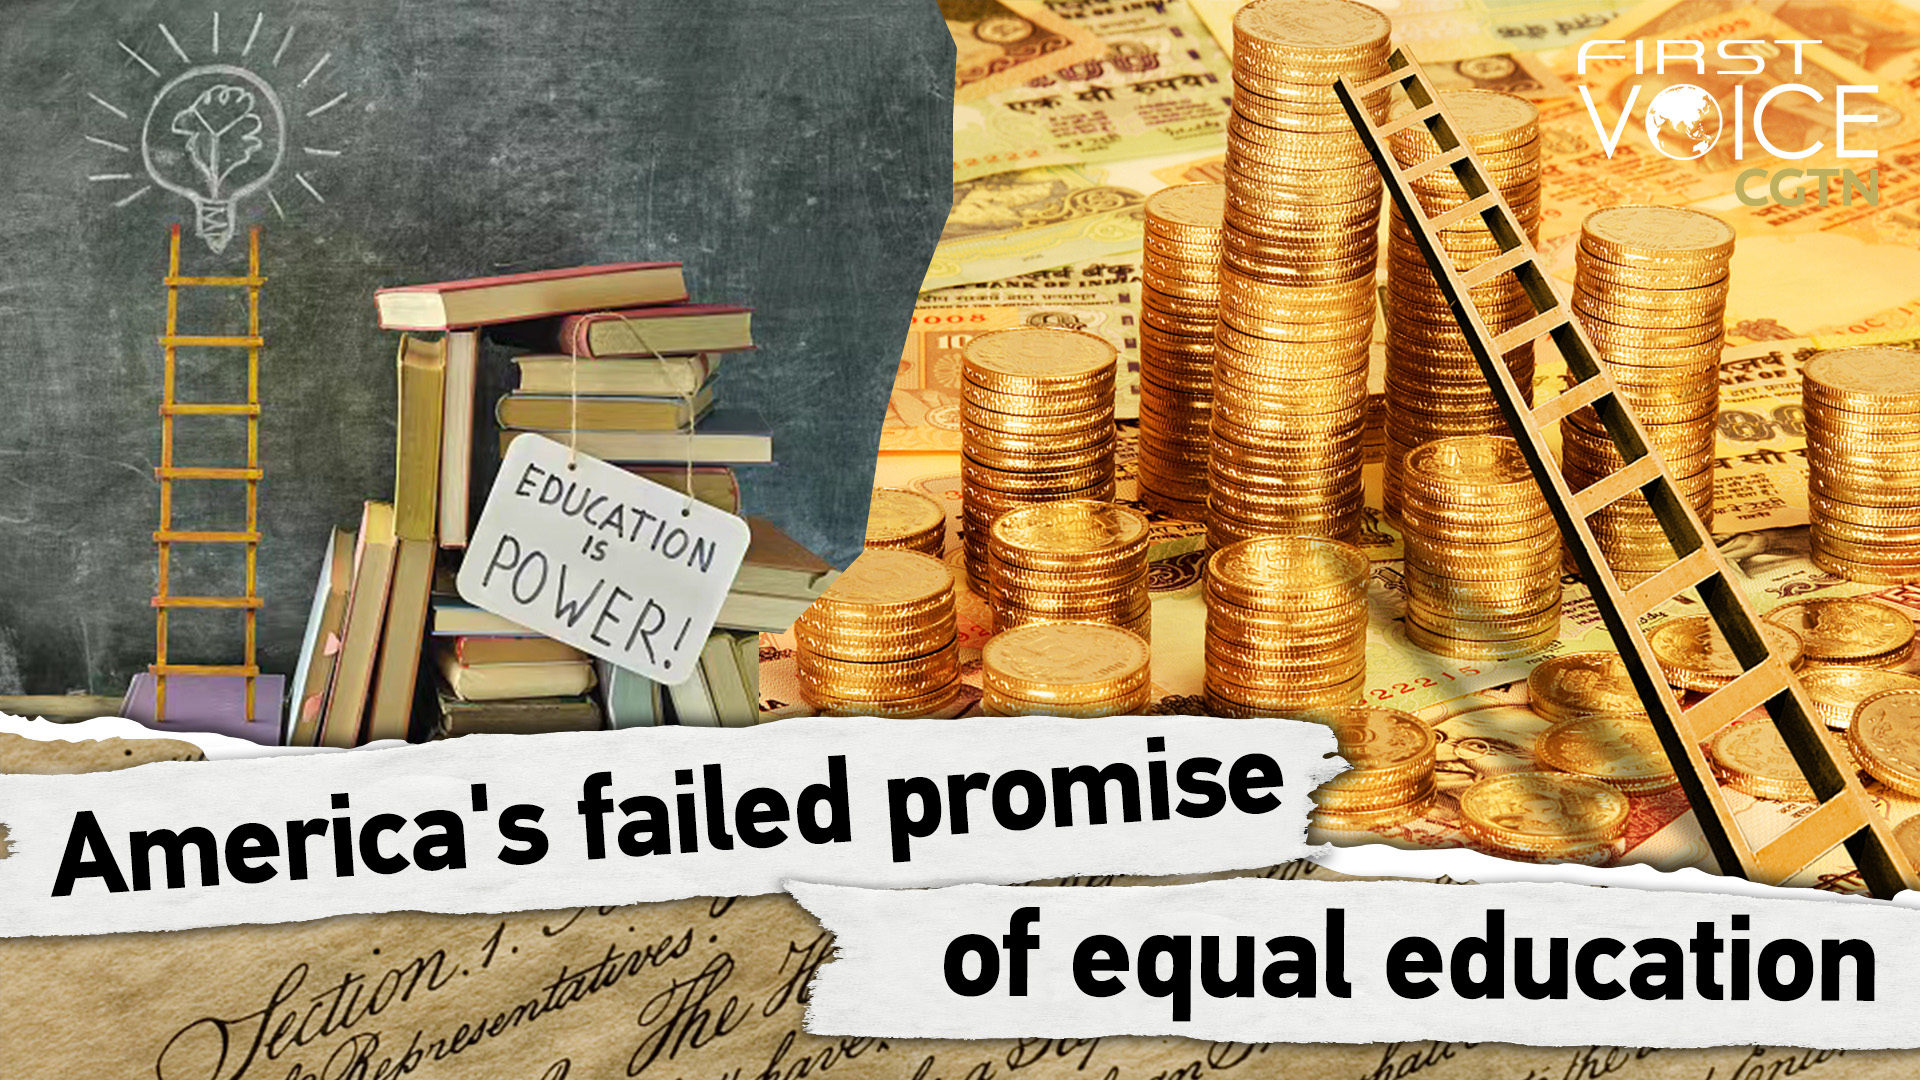 America's failed promise of equal education